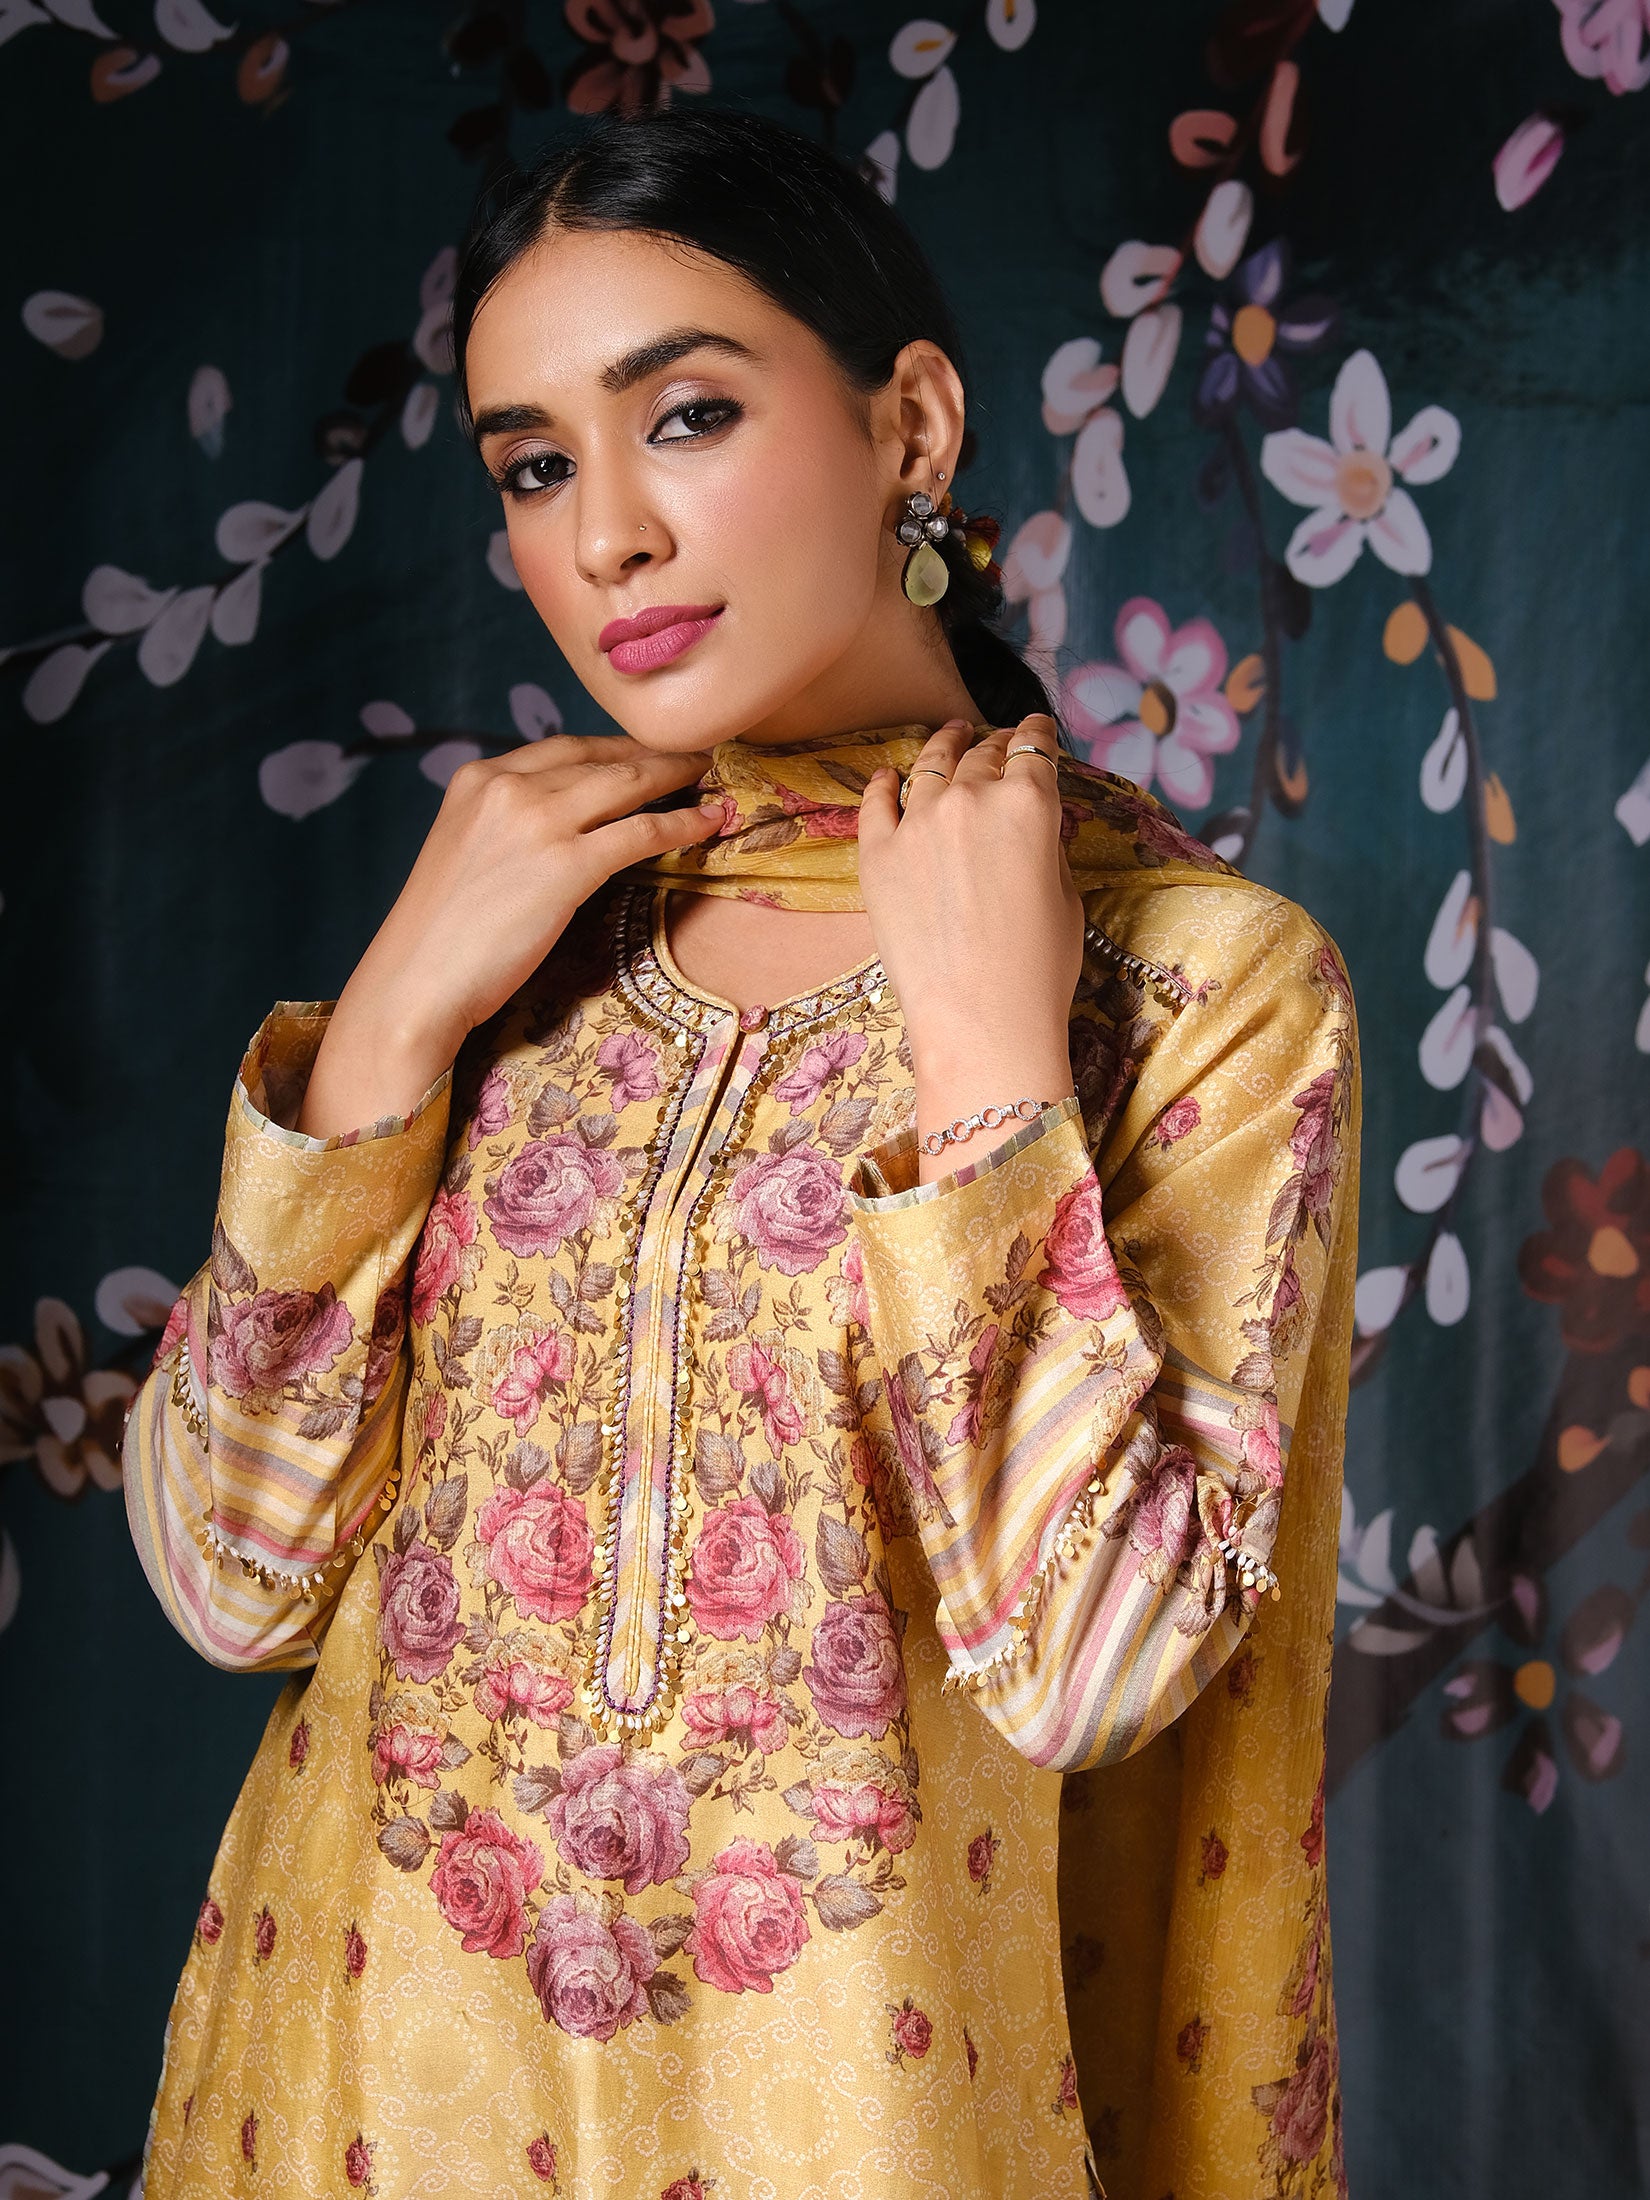 Classic Neck Rose and Stripe with Dupatta - Yellow